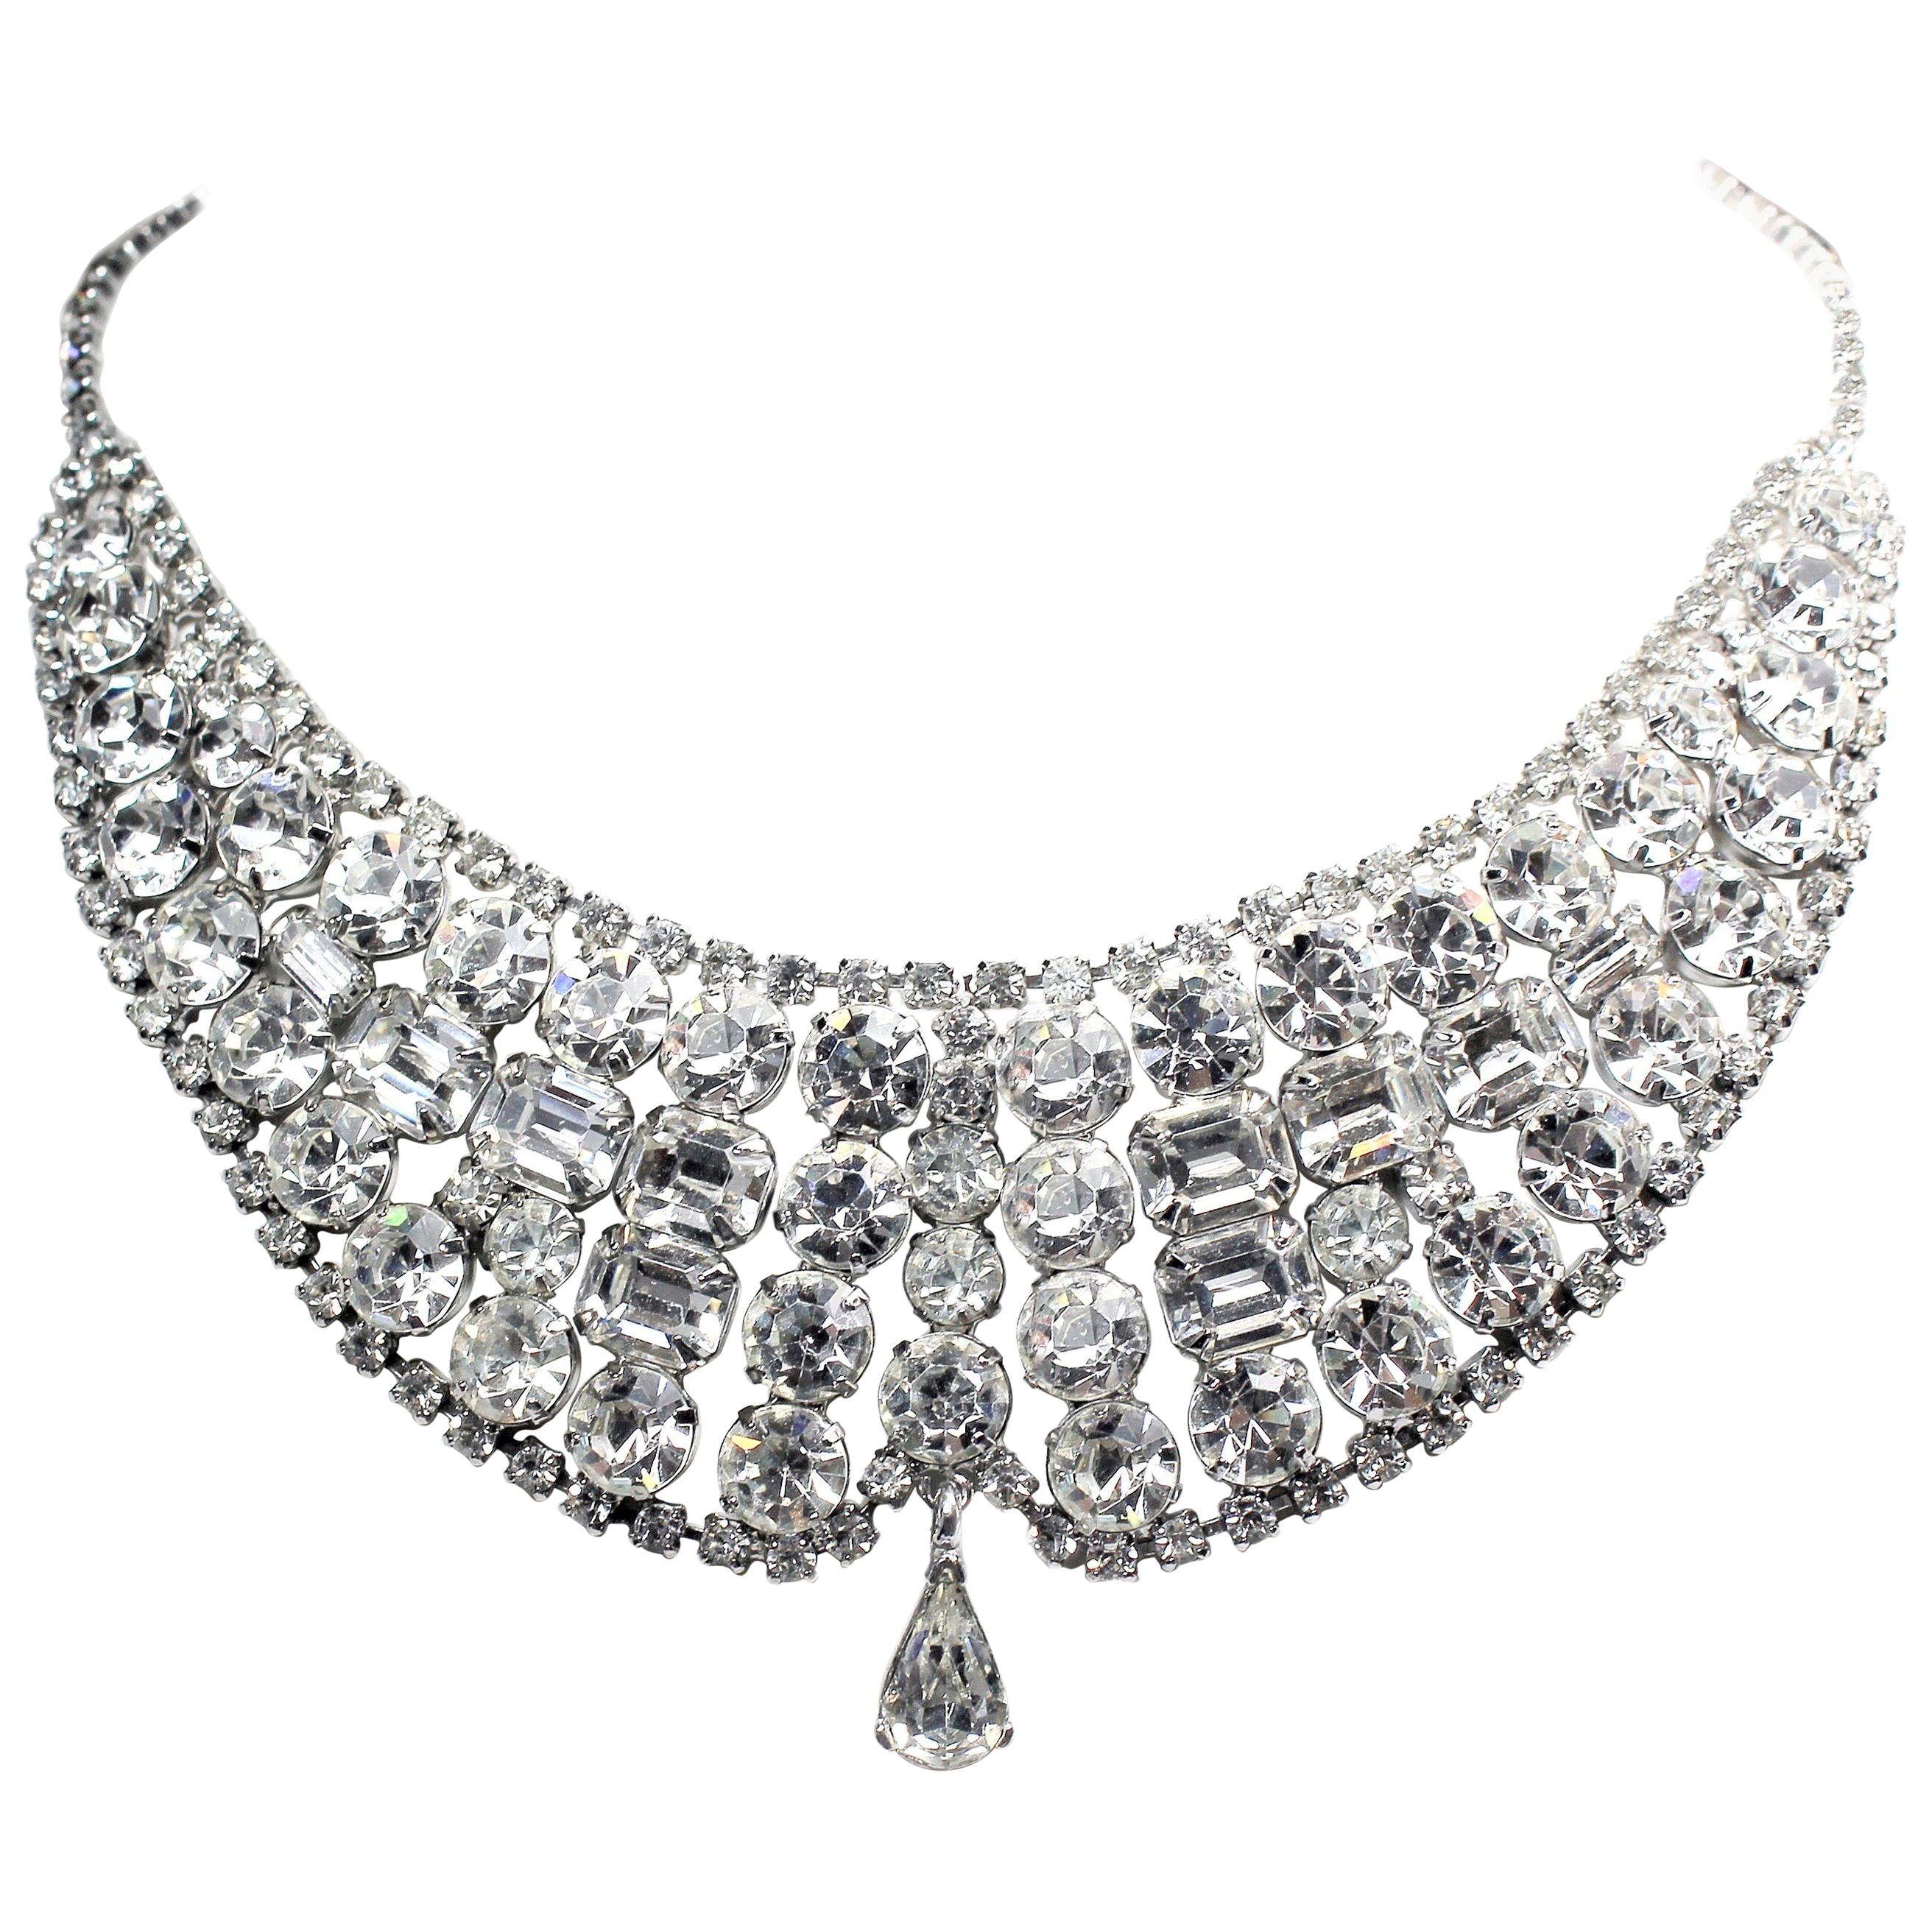 Circa 1950s Clear Faceted Crystal Cocktail Necklace For Sale